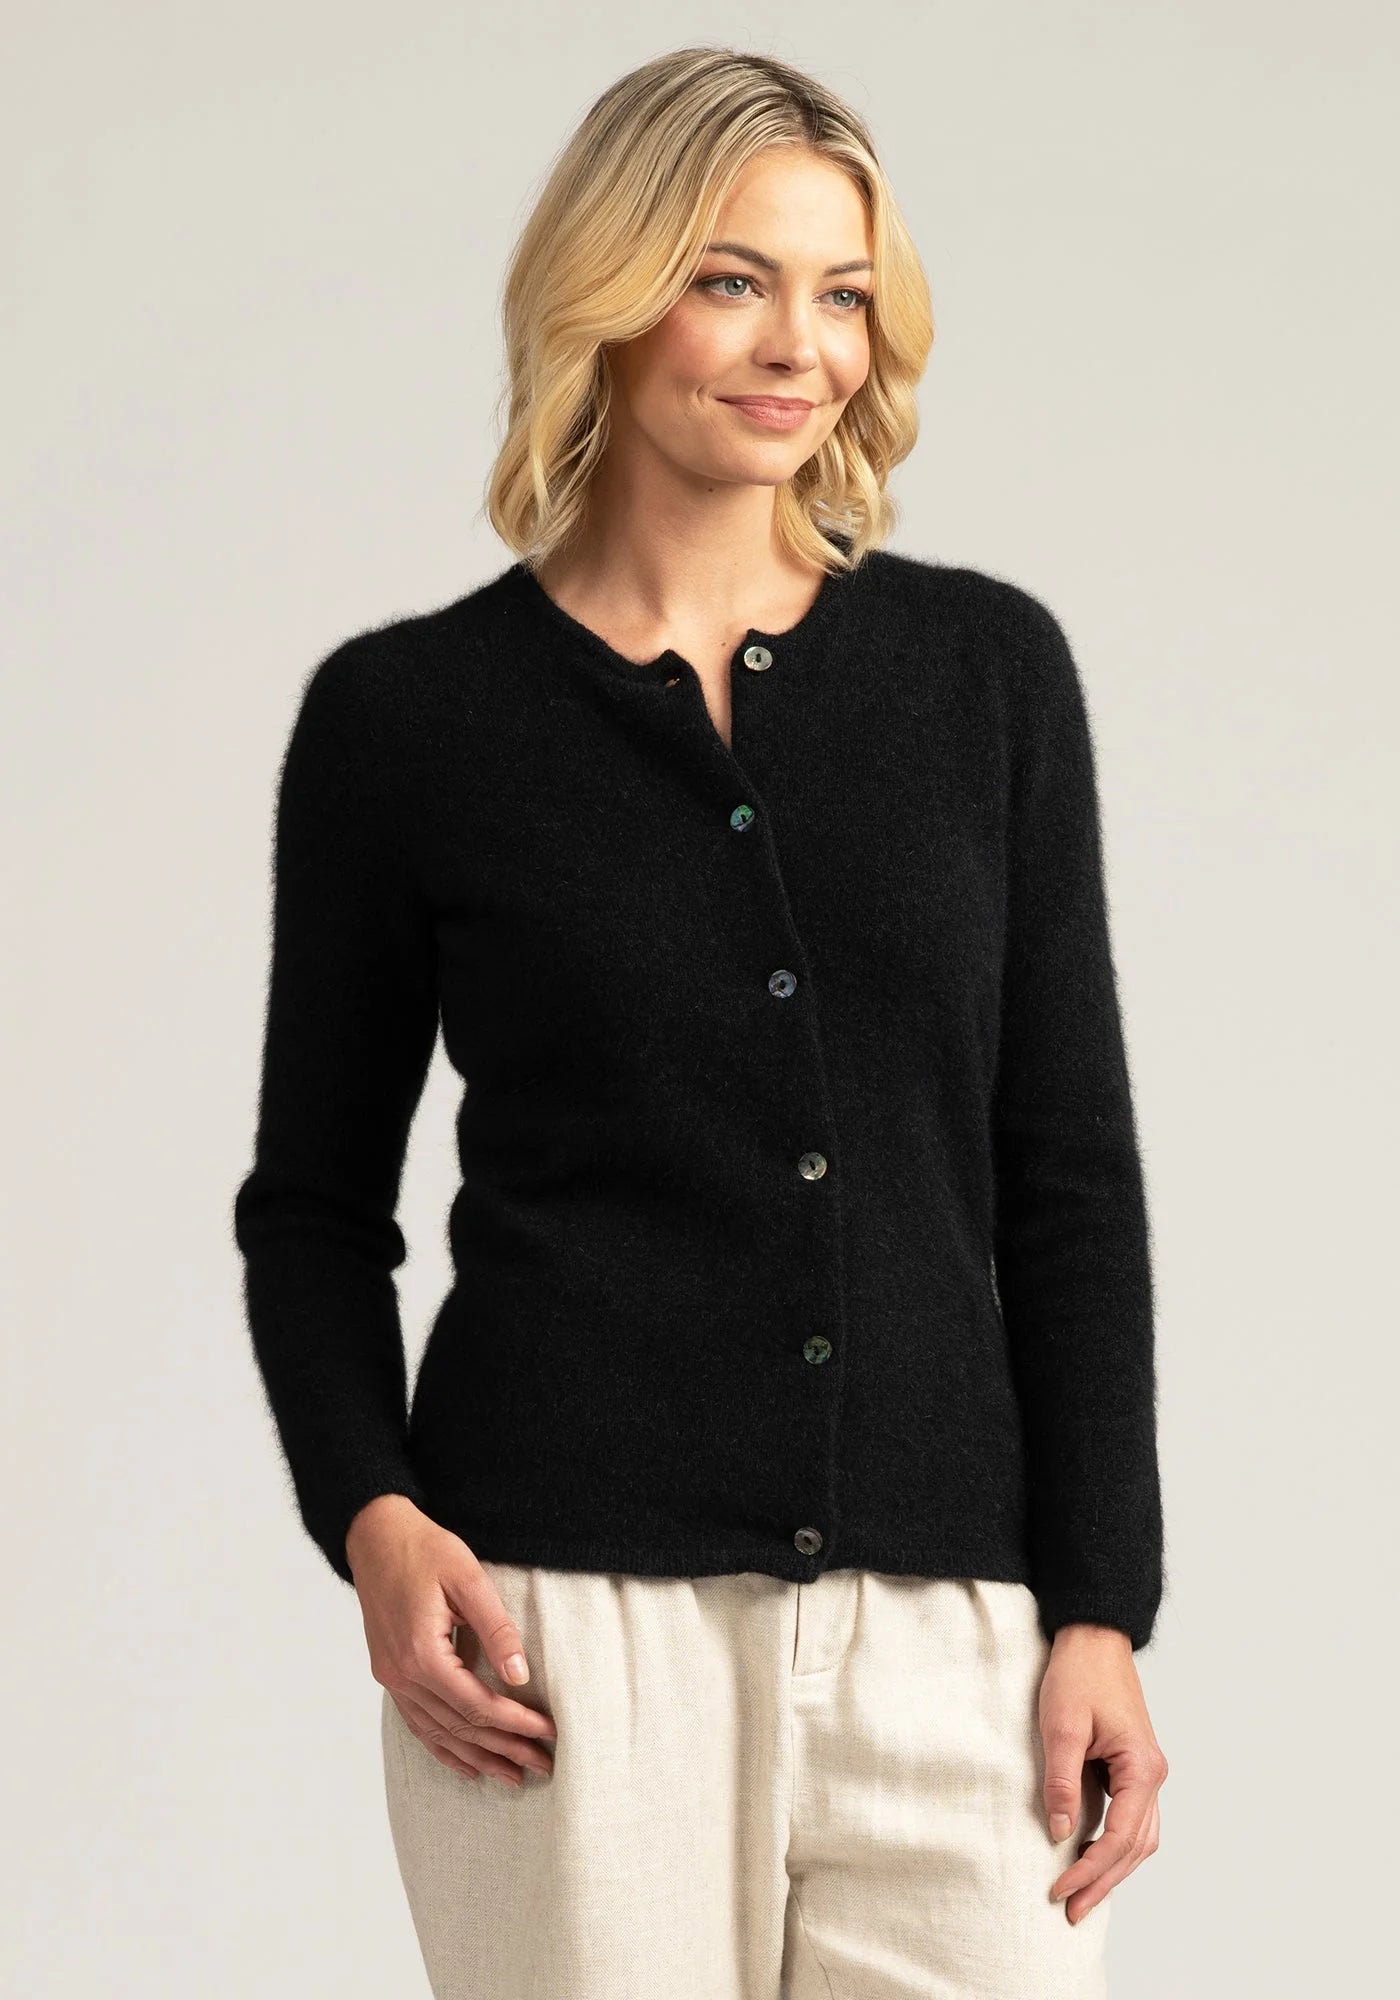 "Wrap yourself in luxury with our black merino wool button-up cardigan. Effortless chic for any occasion."